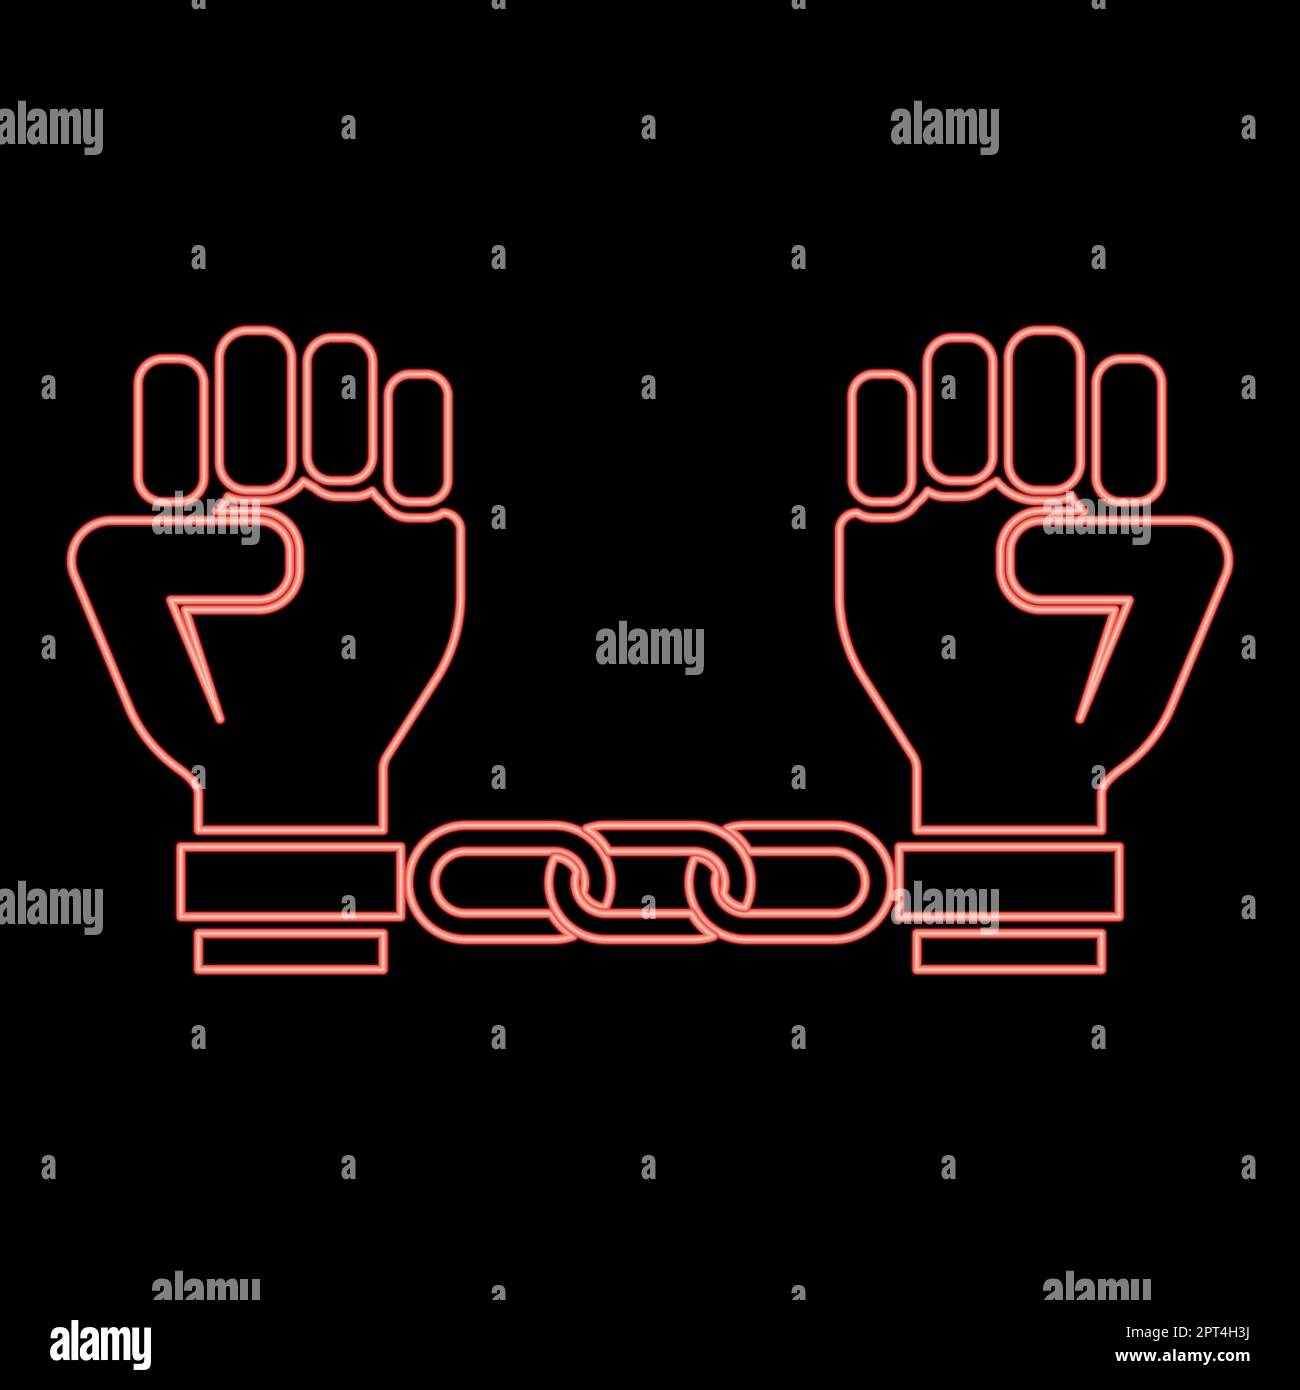 Neon handcuffed hands Chained human arms Prisoner concept Manacles on man Detention idea Fetters confine Shackles on person icon black color vector illustration flat style image red color vector illustration image flat style Stock Vector